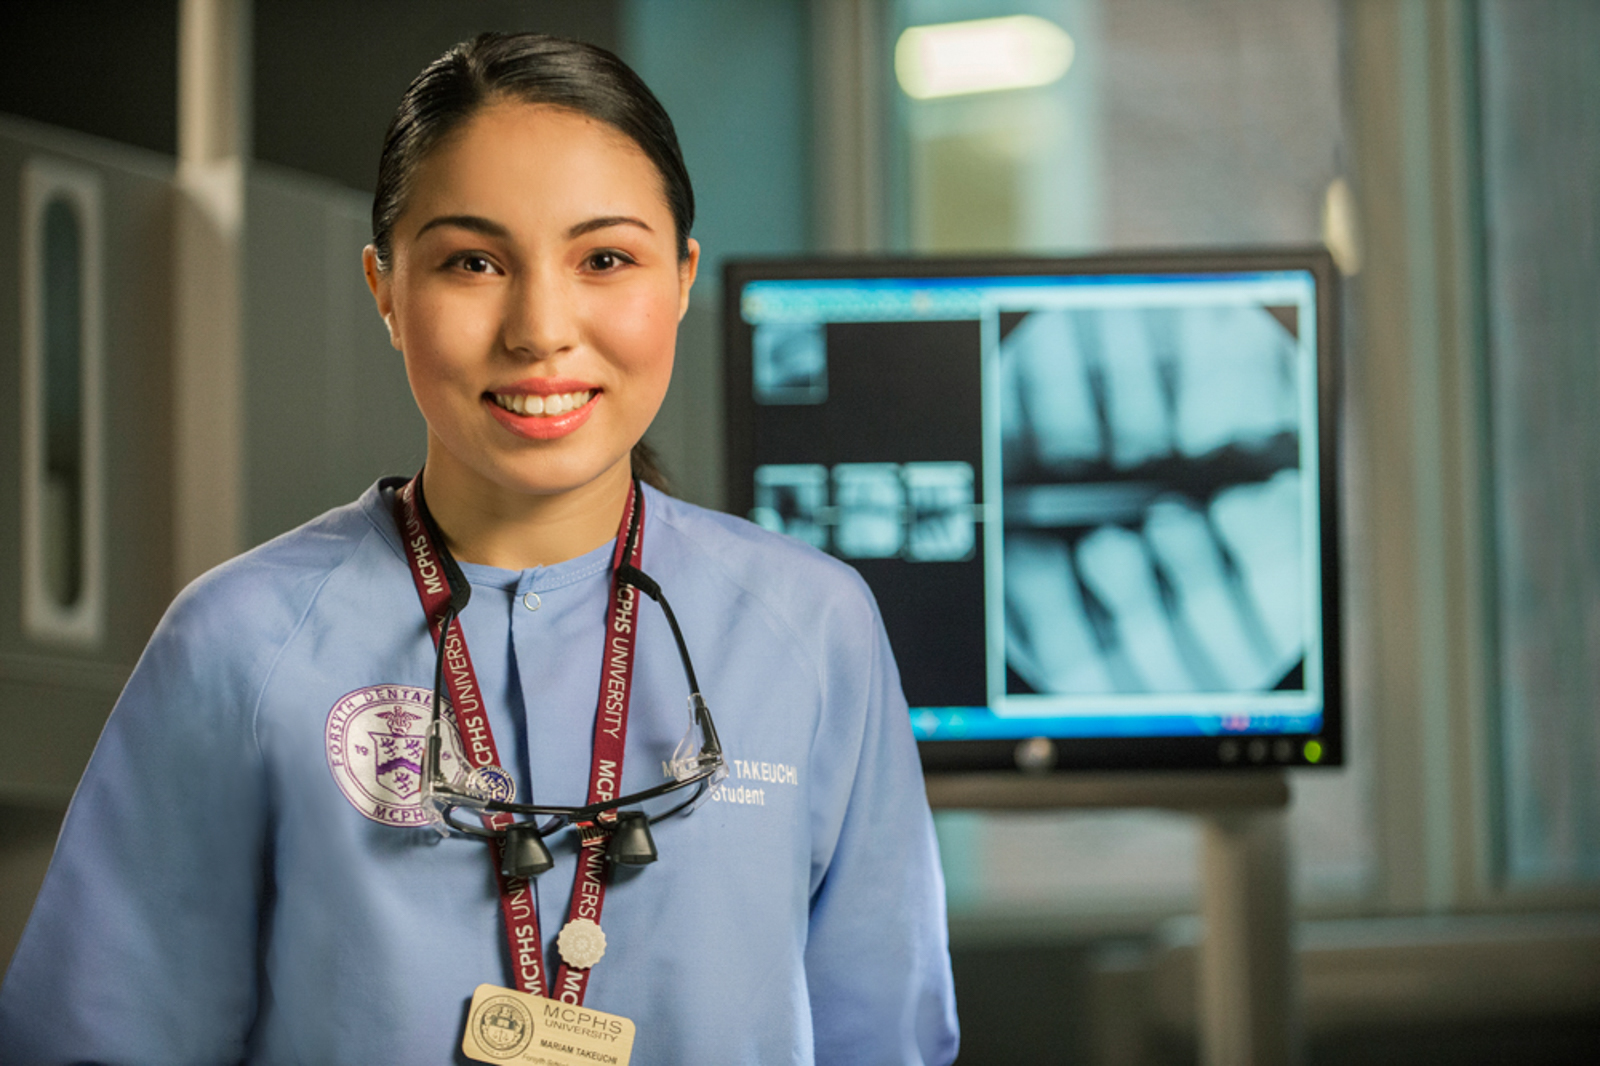 Portrait of female medical student in front of monitor with xrays